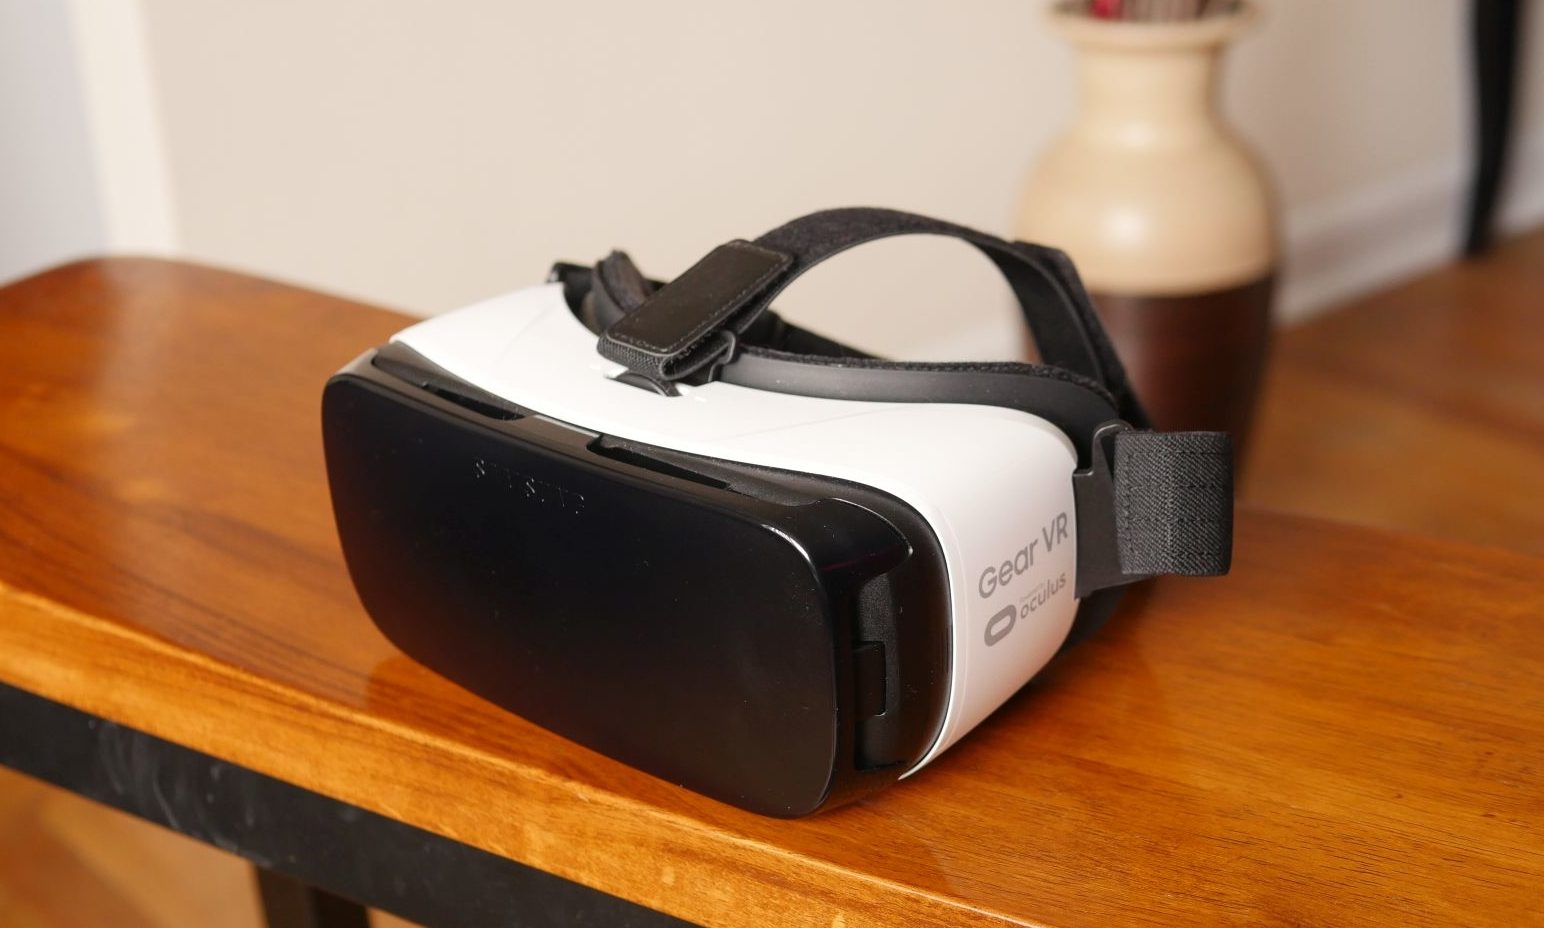 Samsung Gear VR everything you need to know